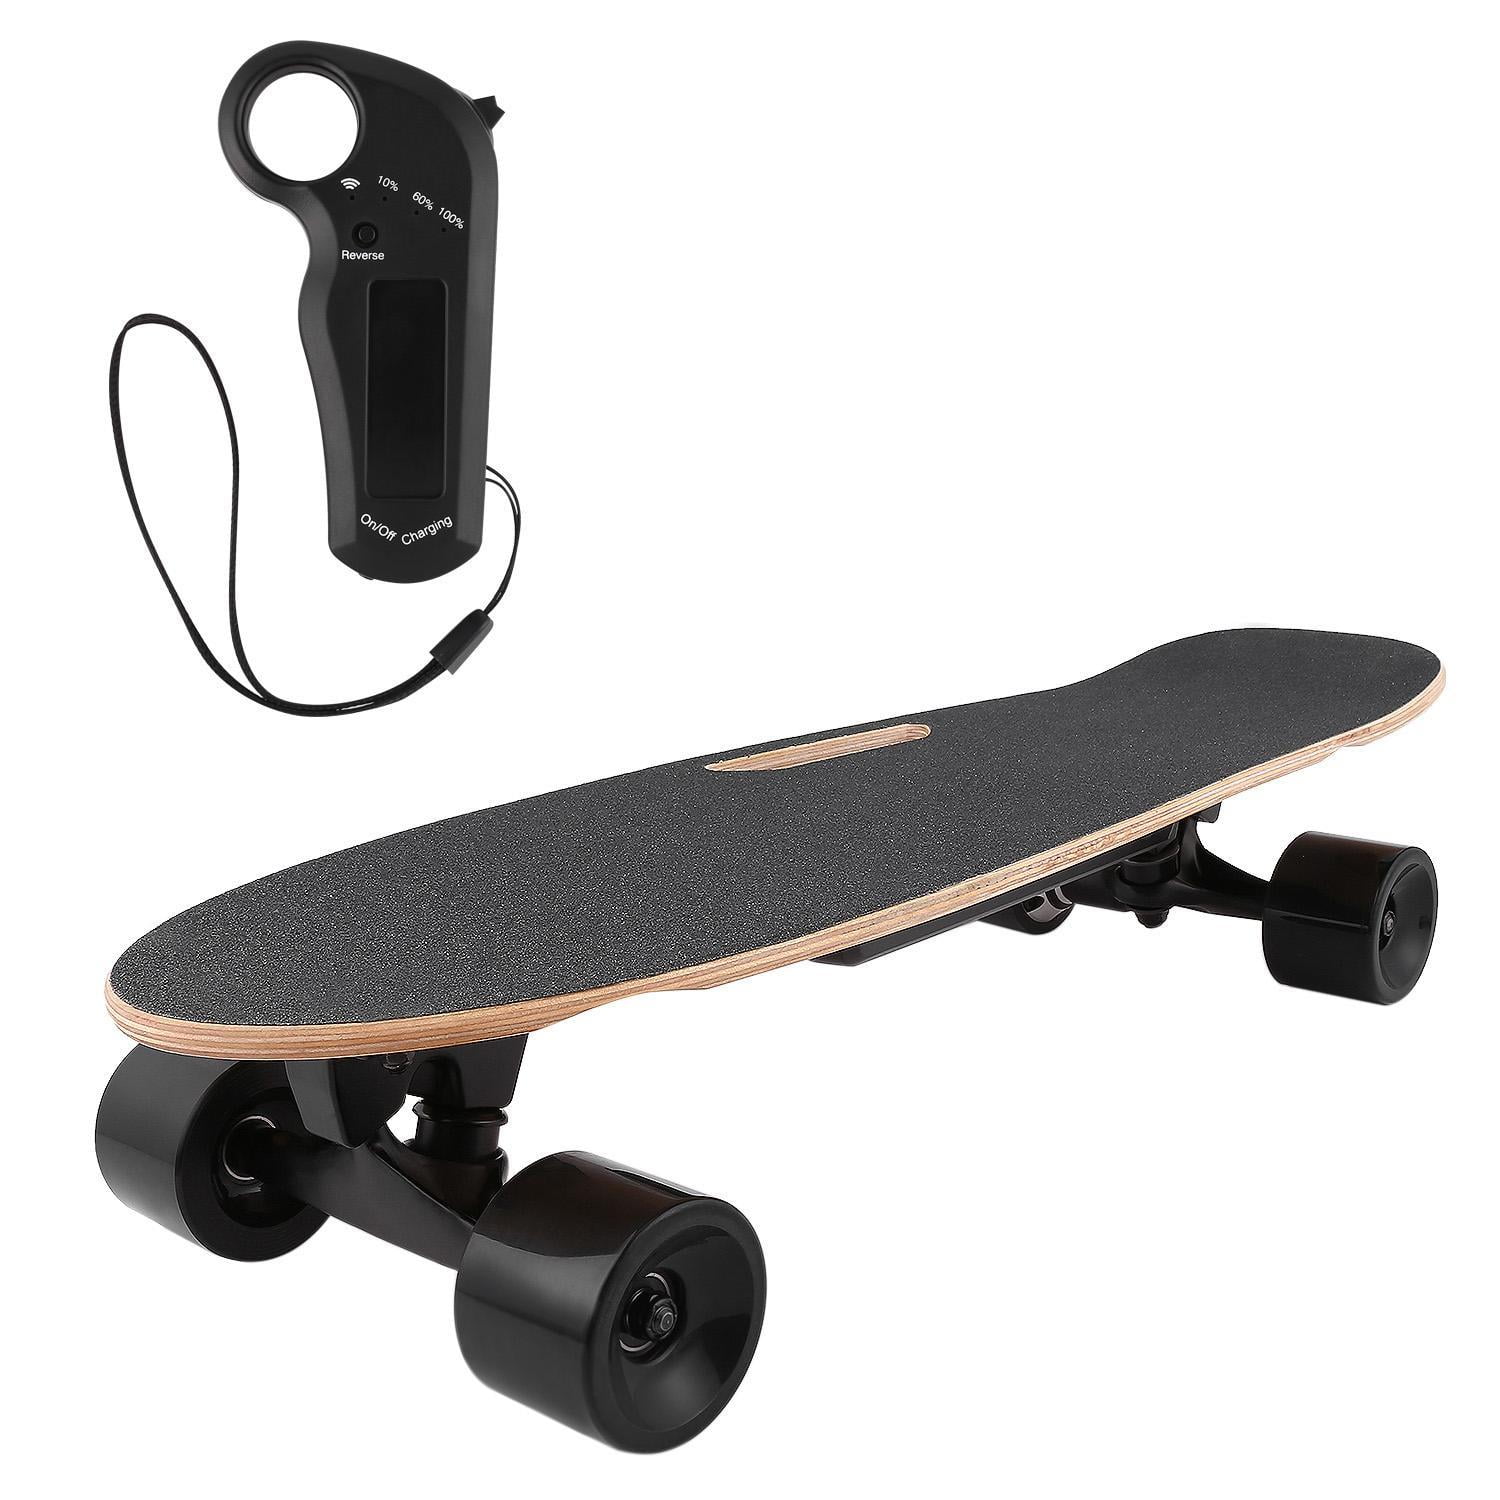 Portable Electric Skateboard Longboard Remote Control With Power Indicator Newly 